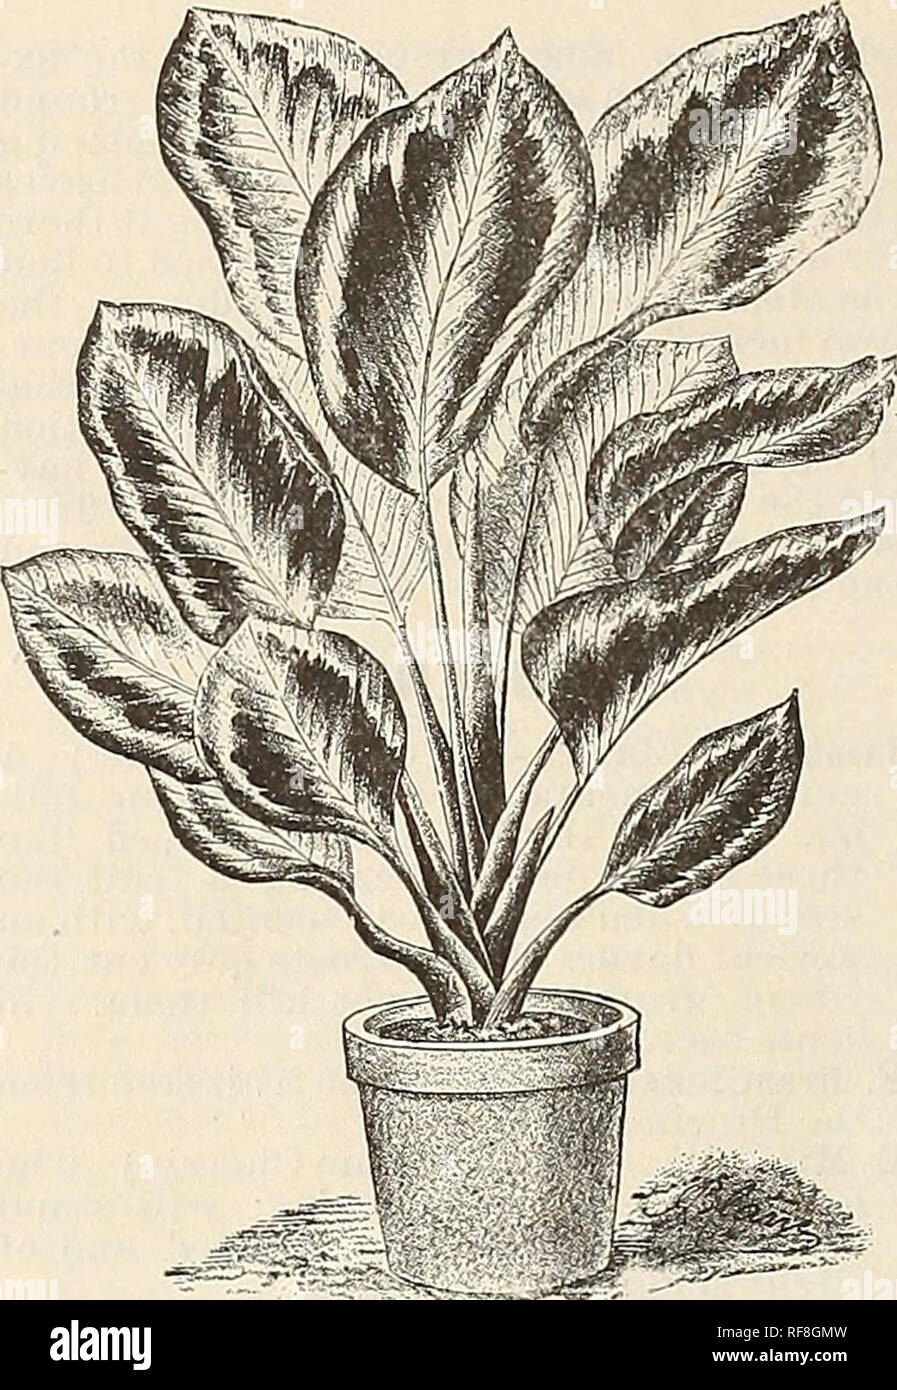 . Catalogue of the Palm and Citrus Nursery including tropical and semi-tropical fruit trees. Nurseries (Horticulture) California Santa Barbara Catalogs; Tropical plants Catalogs; Fruit trees Seedlings Catalogs. 4 KIMTON STEVENS, SANTA BARBARA, CALIFORNIA.. MARANTA. (Ui uaiueiUal Foliage.) MARANTA ARUNDINACEA. (Arrow Root.) A herbaceous plant resembling somewhat the Canna, to which family it belongs; the root furnishes the well known Bermuda Arrow-root. Native of South America. 50 cents each. MAMMEA AMERICANA. {The Mammee Apple.) A tall tree with a thick, spreading head, somewhat resembling the Stock Photo